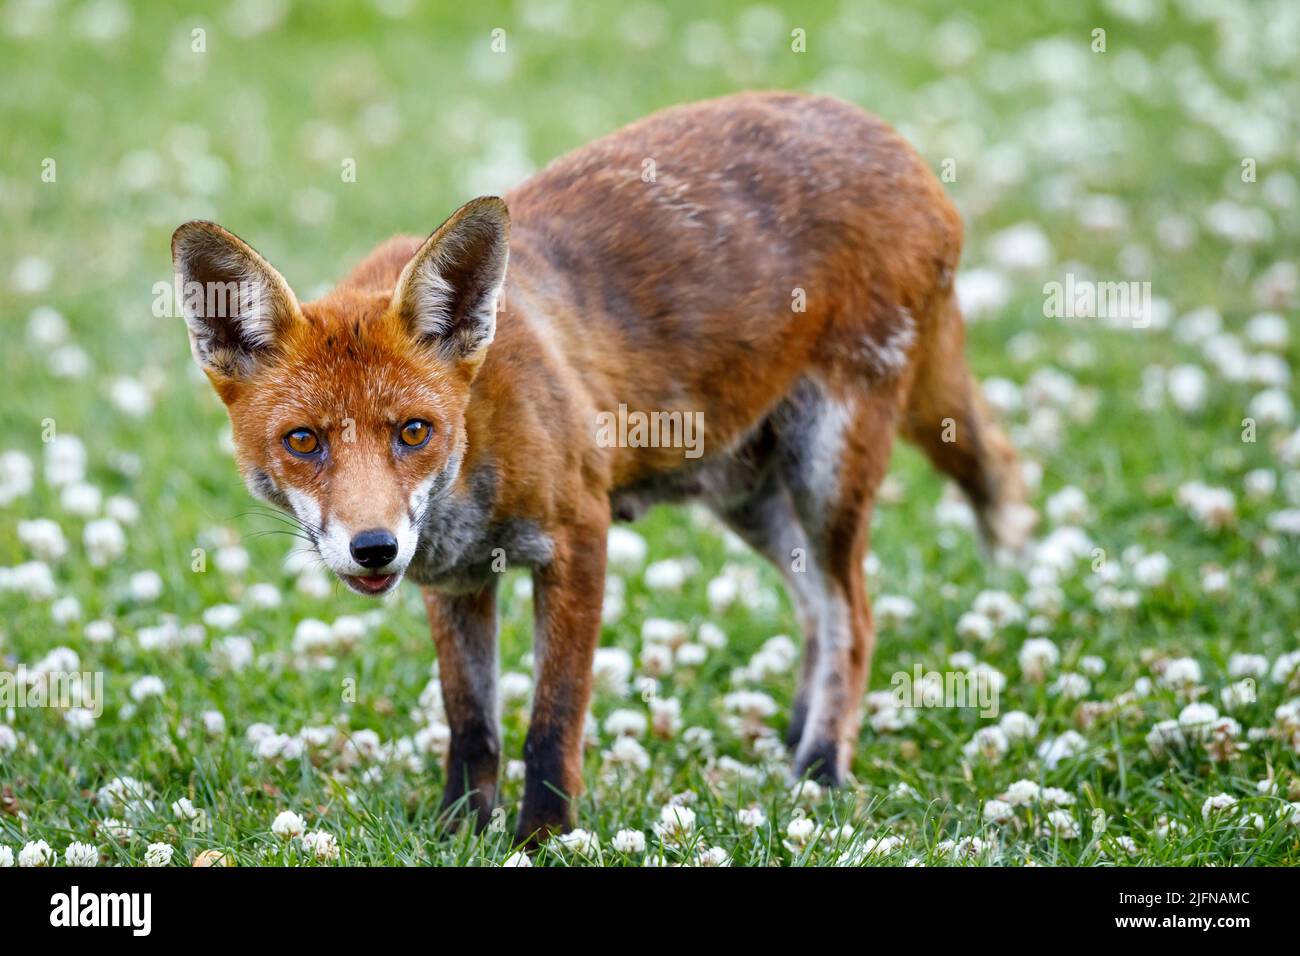 Wild Red Fox (Vulpes vulpes) on a clover covered garden lawn, Sussex, UK Stock Photo